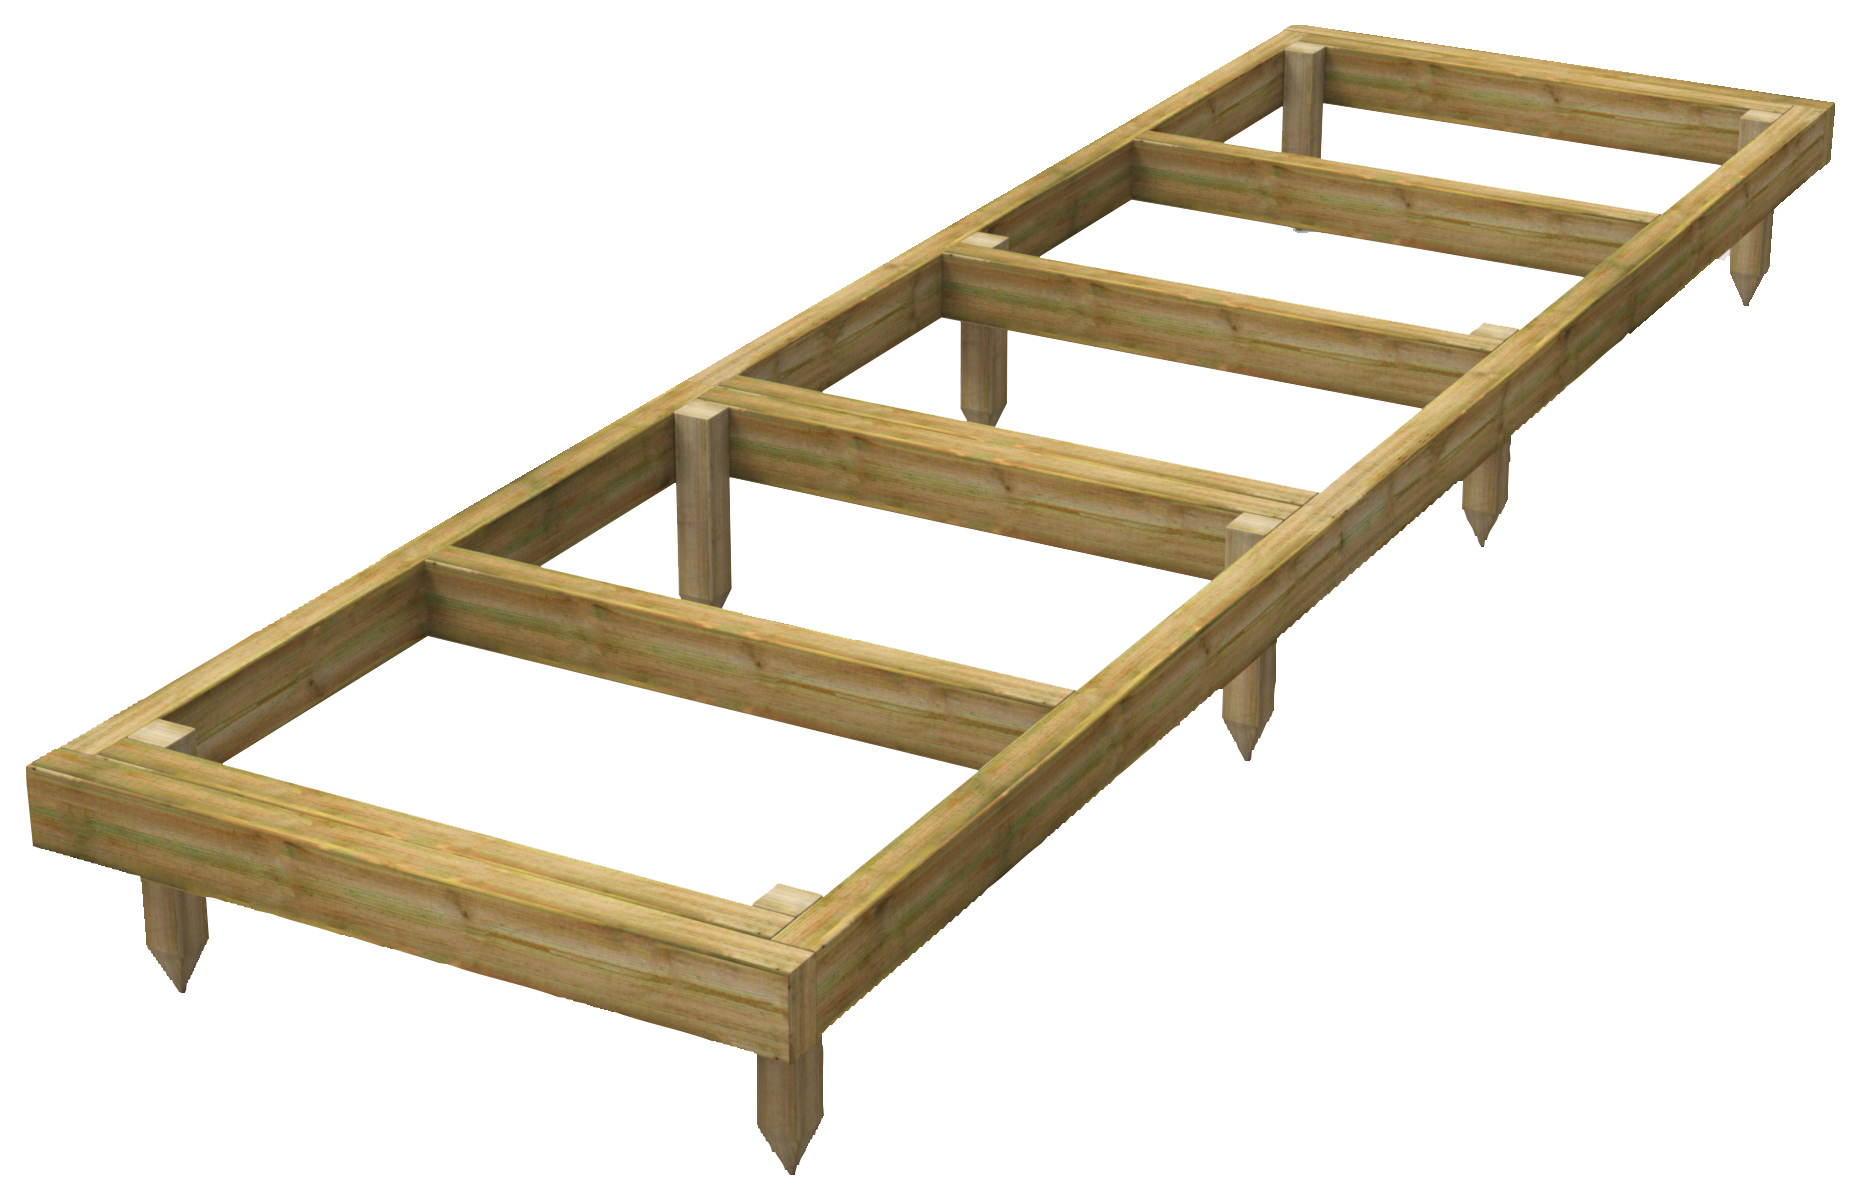 Power Sheds Pressure Treated Garden Building Base Kit - 10 x 3ft